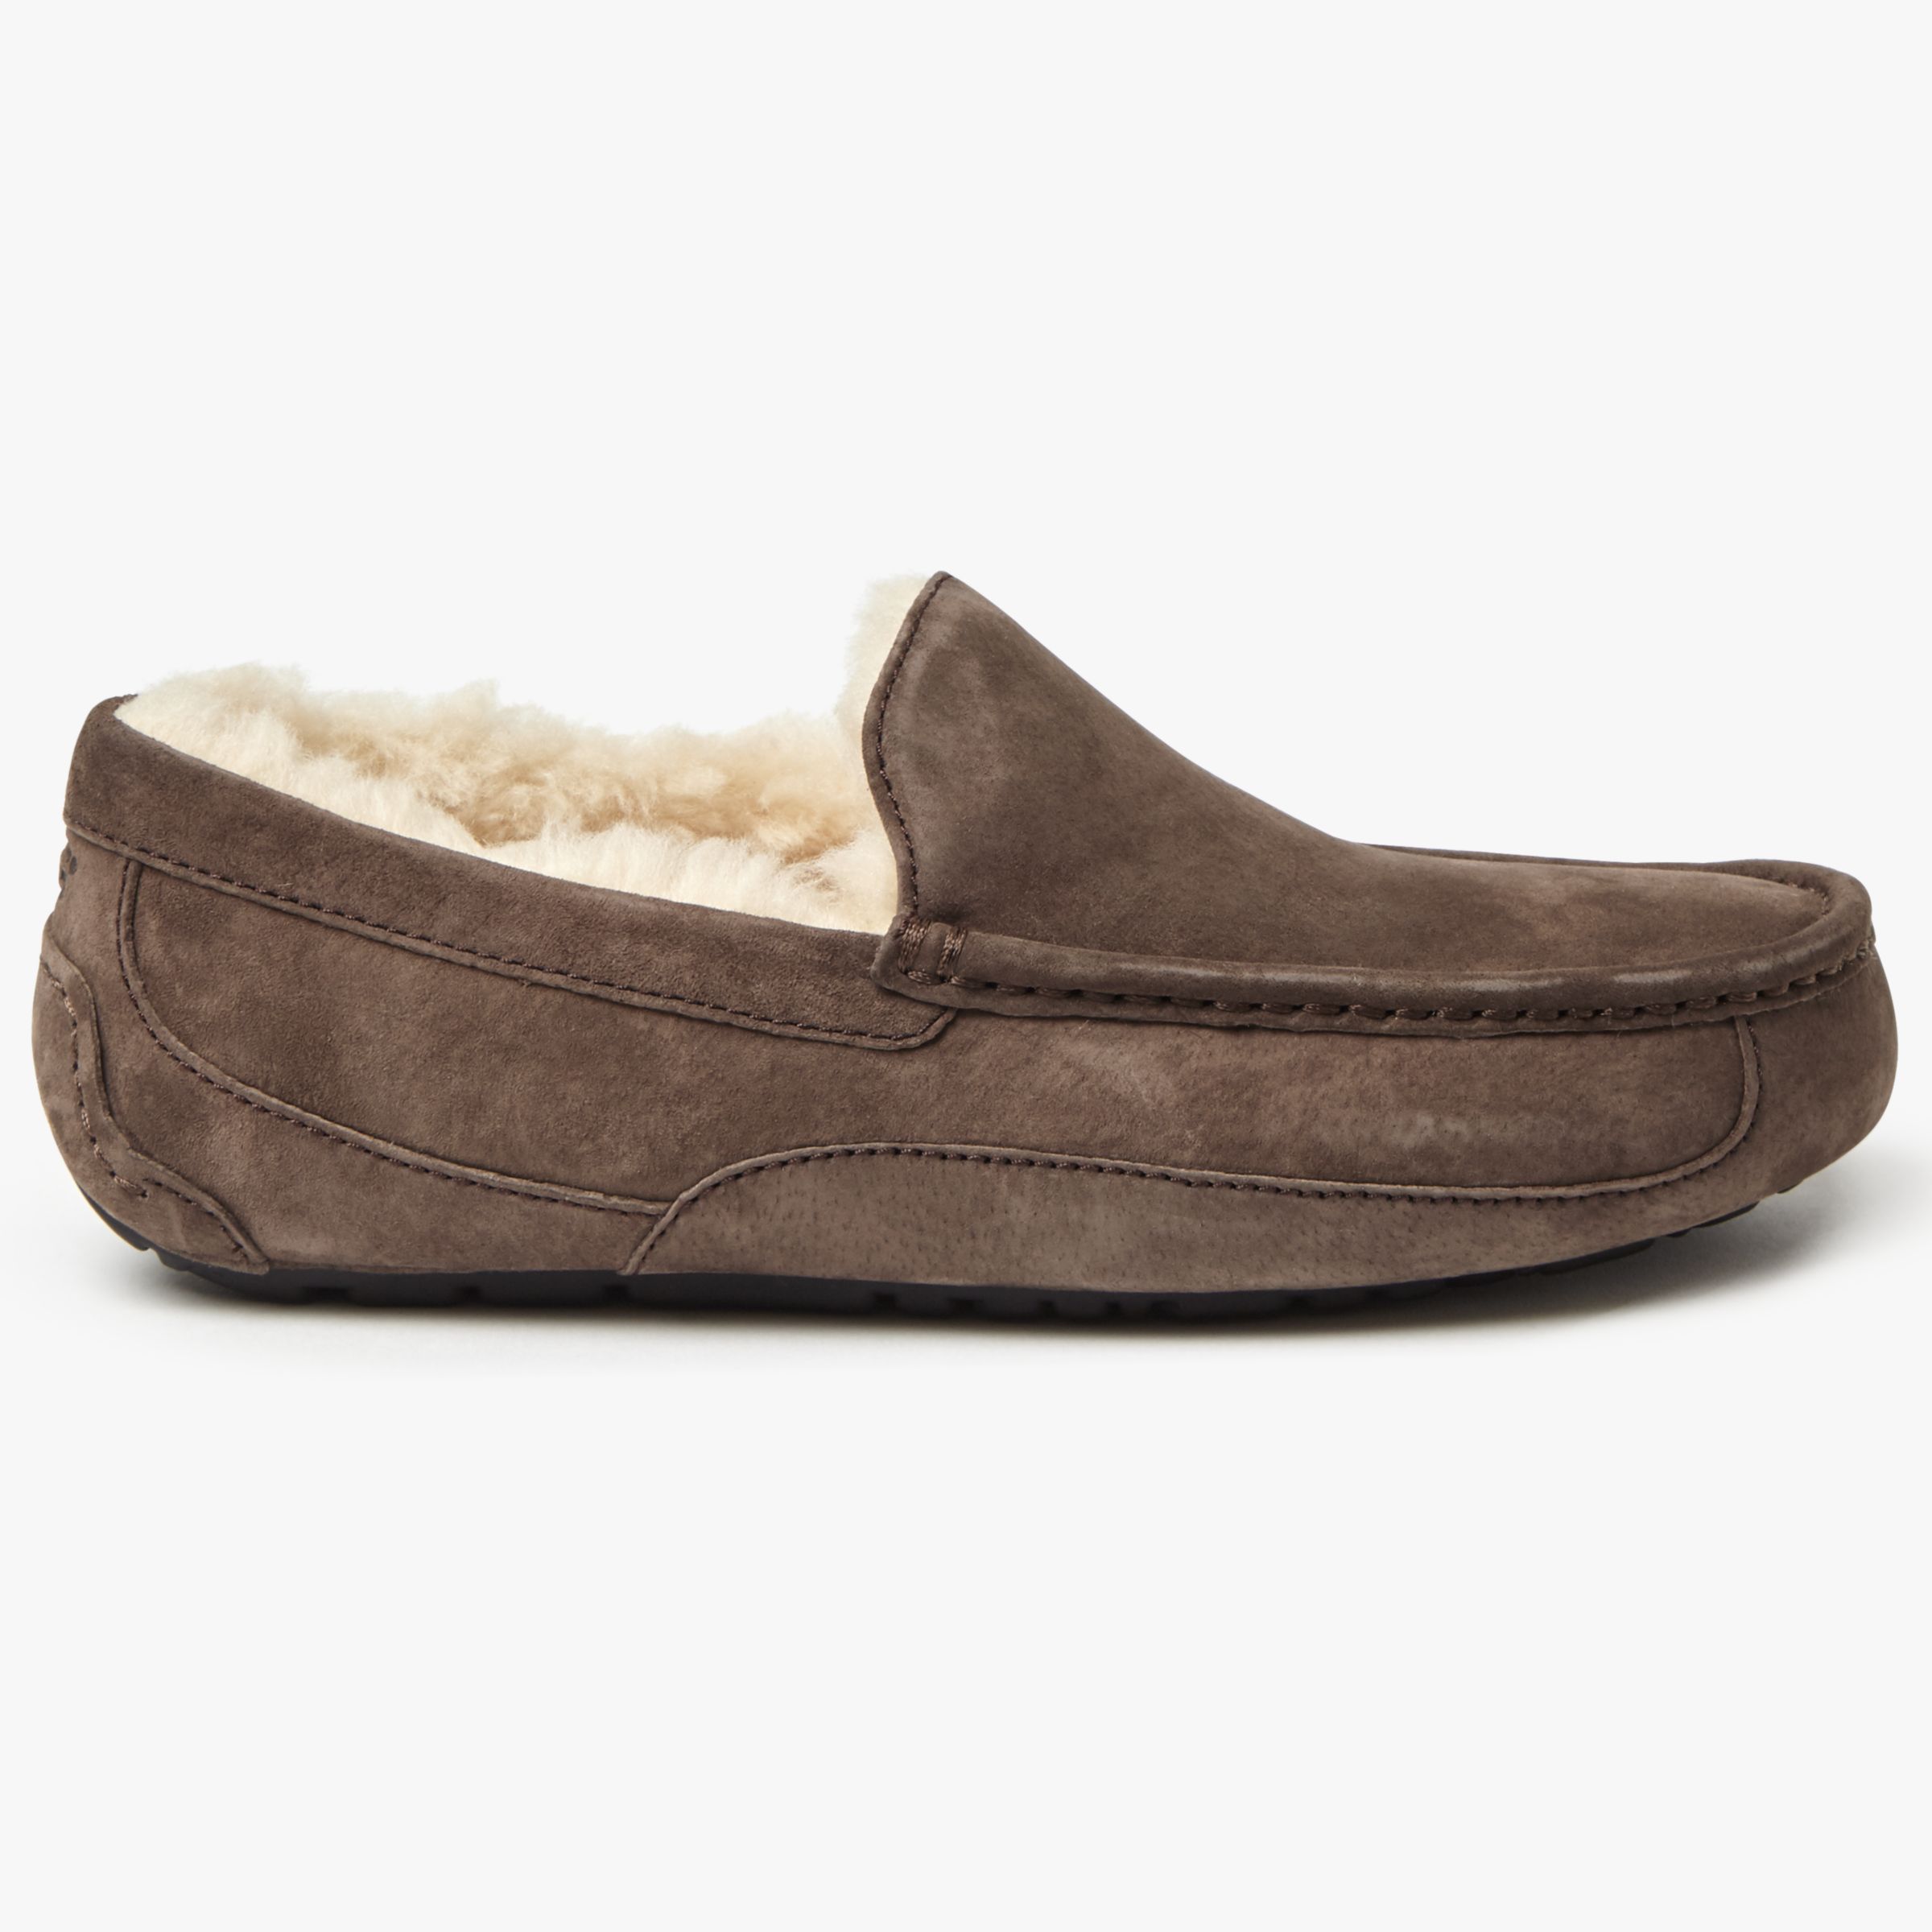 UGG Ascot Moccasin Suede Slippers, Espresso